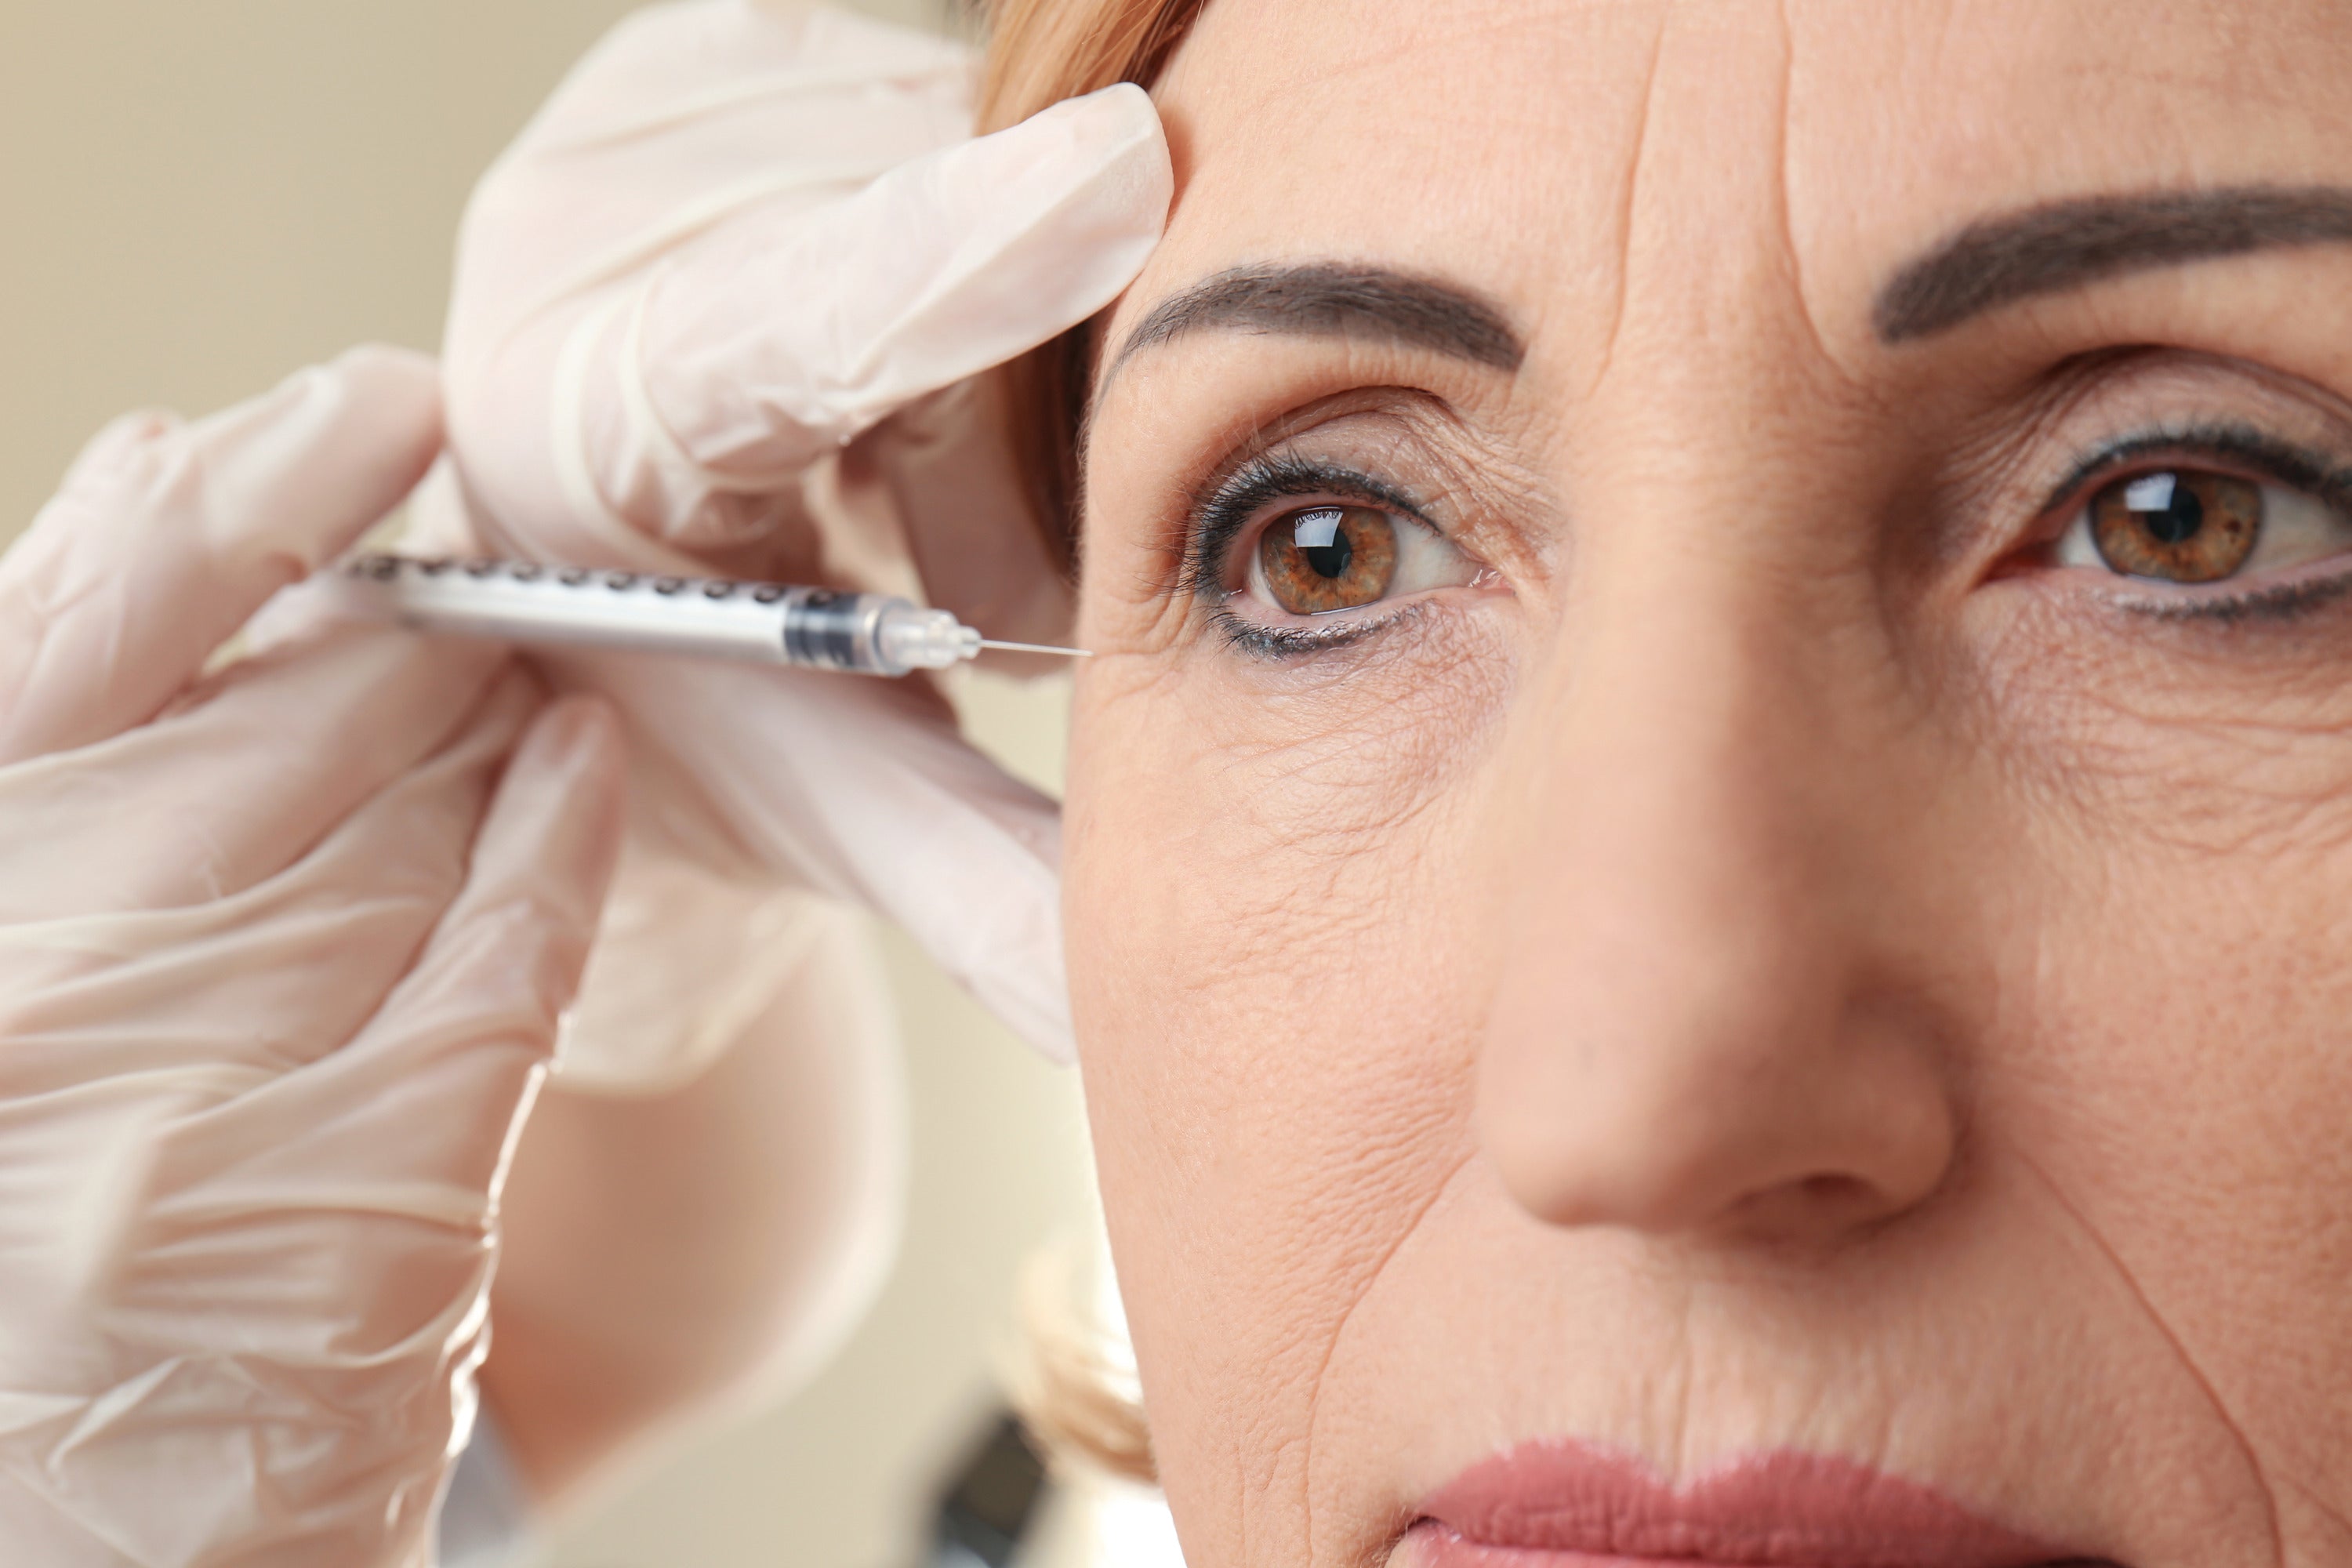 Affecting the effectiveness of Botox if you have wrinkles already